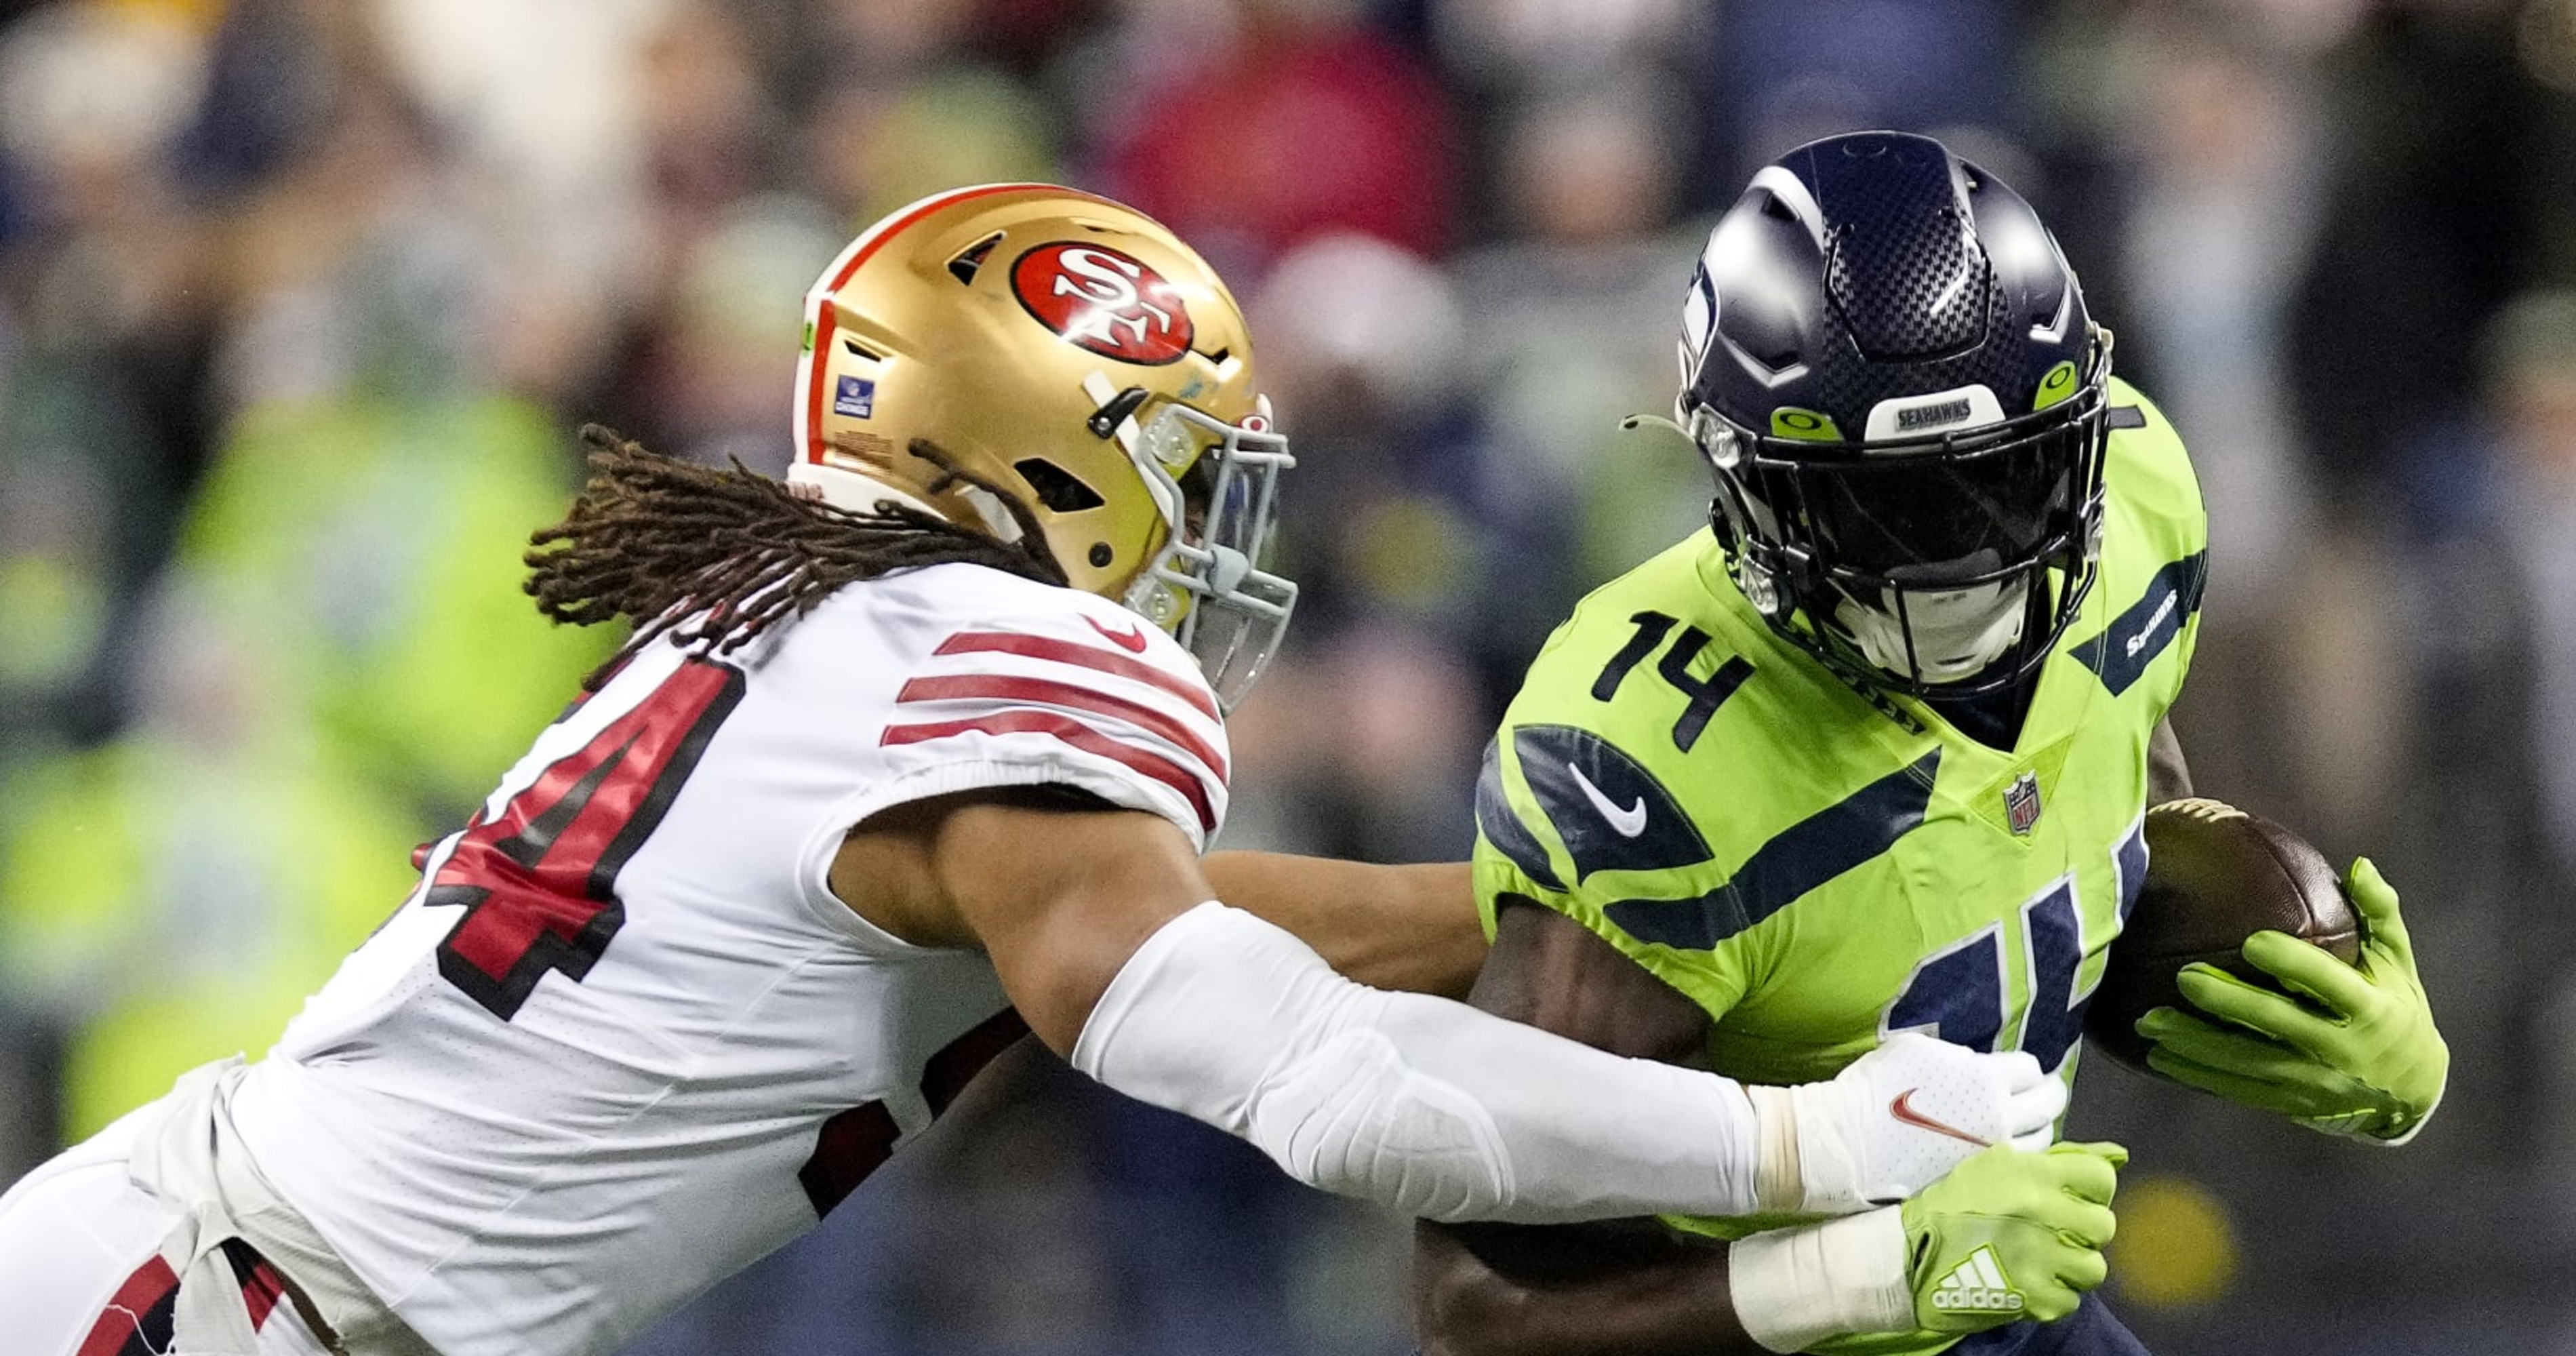 NFL Playoff Picture 2022-23 Week 15: Standings, Scenarios After 49ers vs. Seahawks